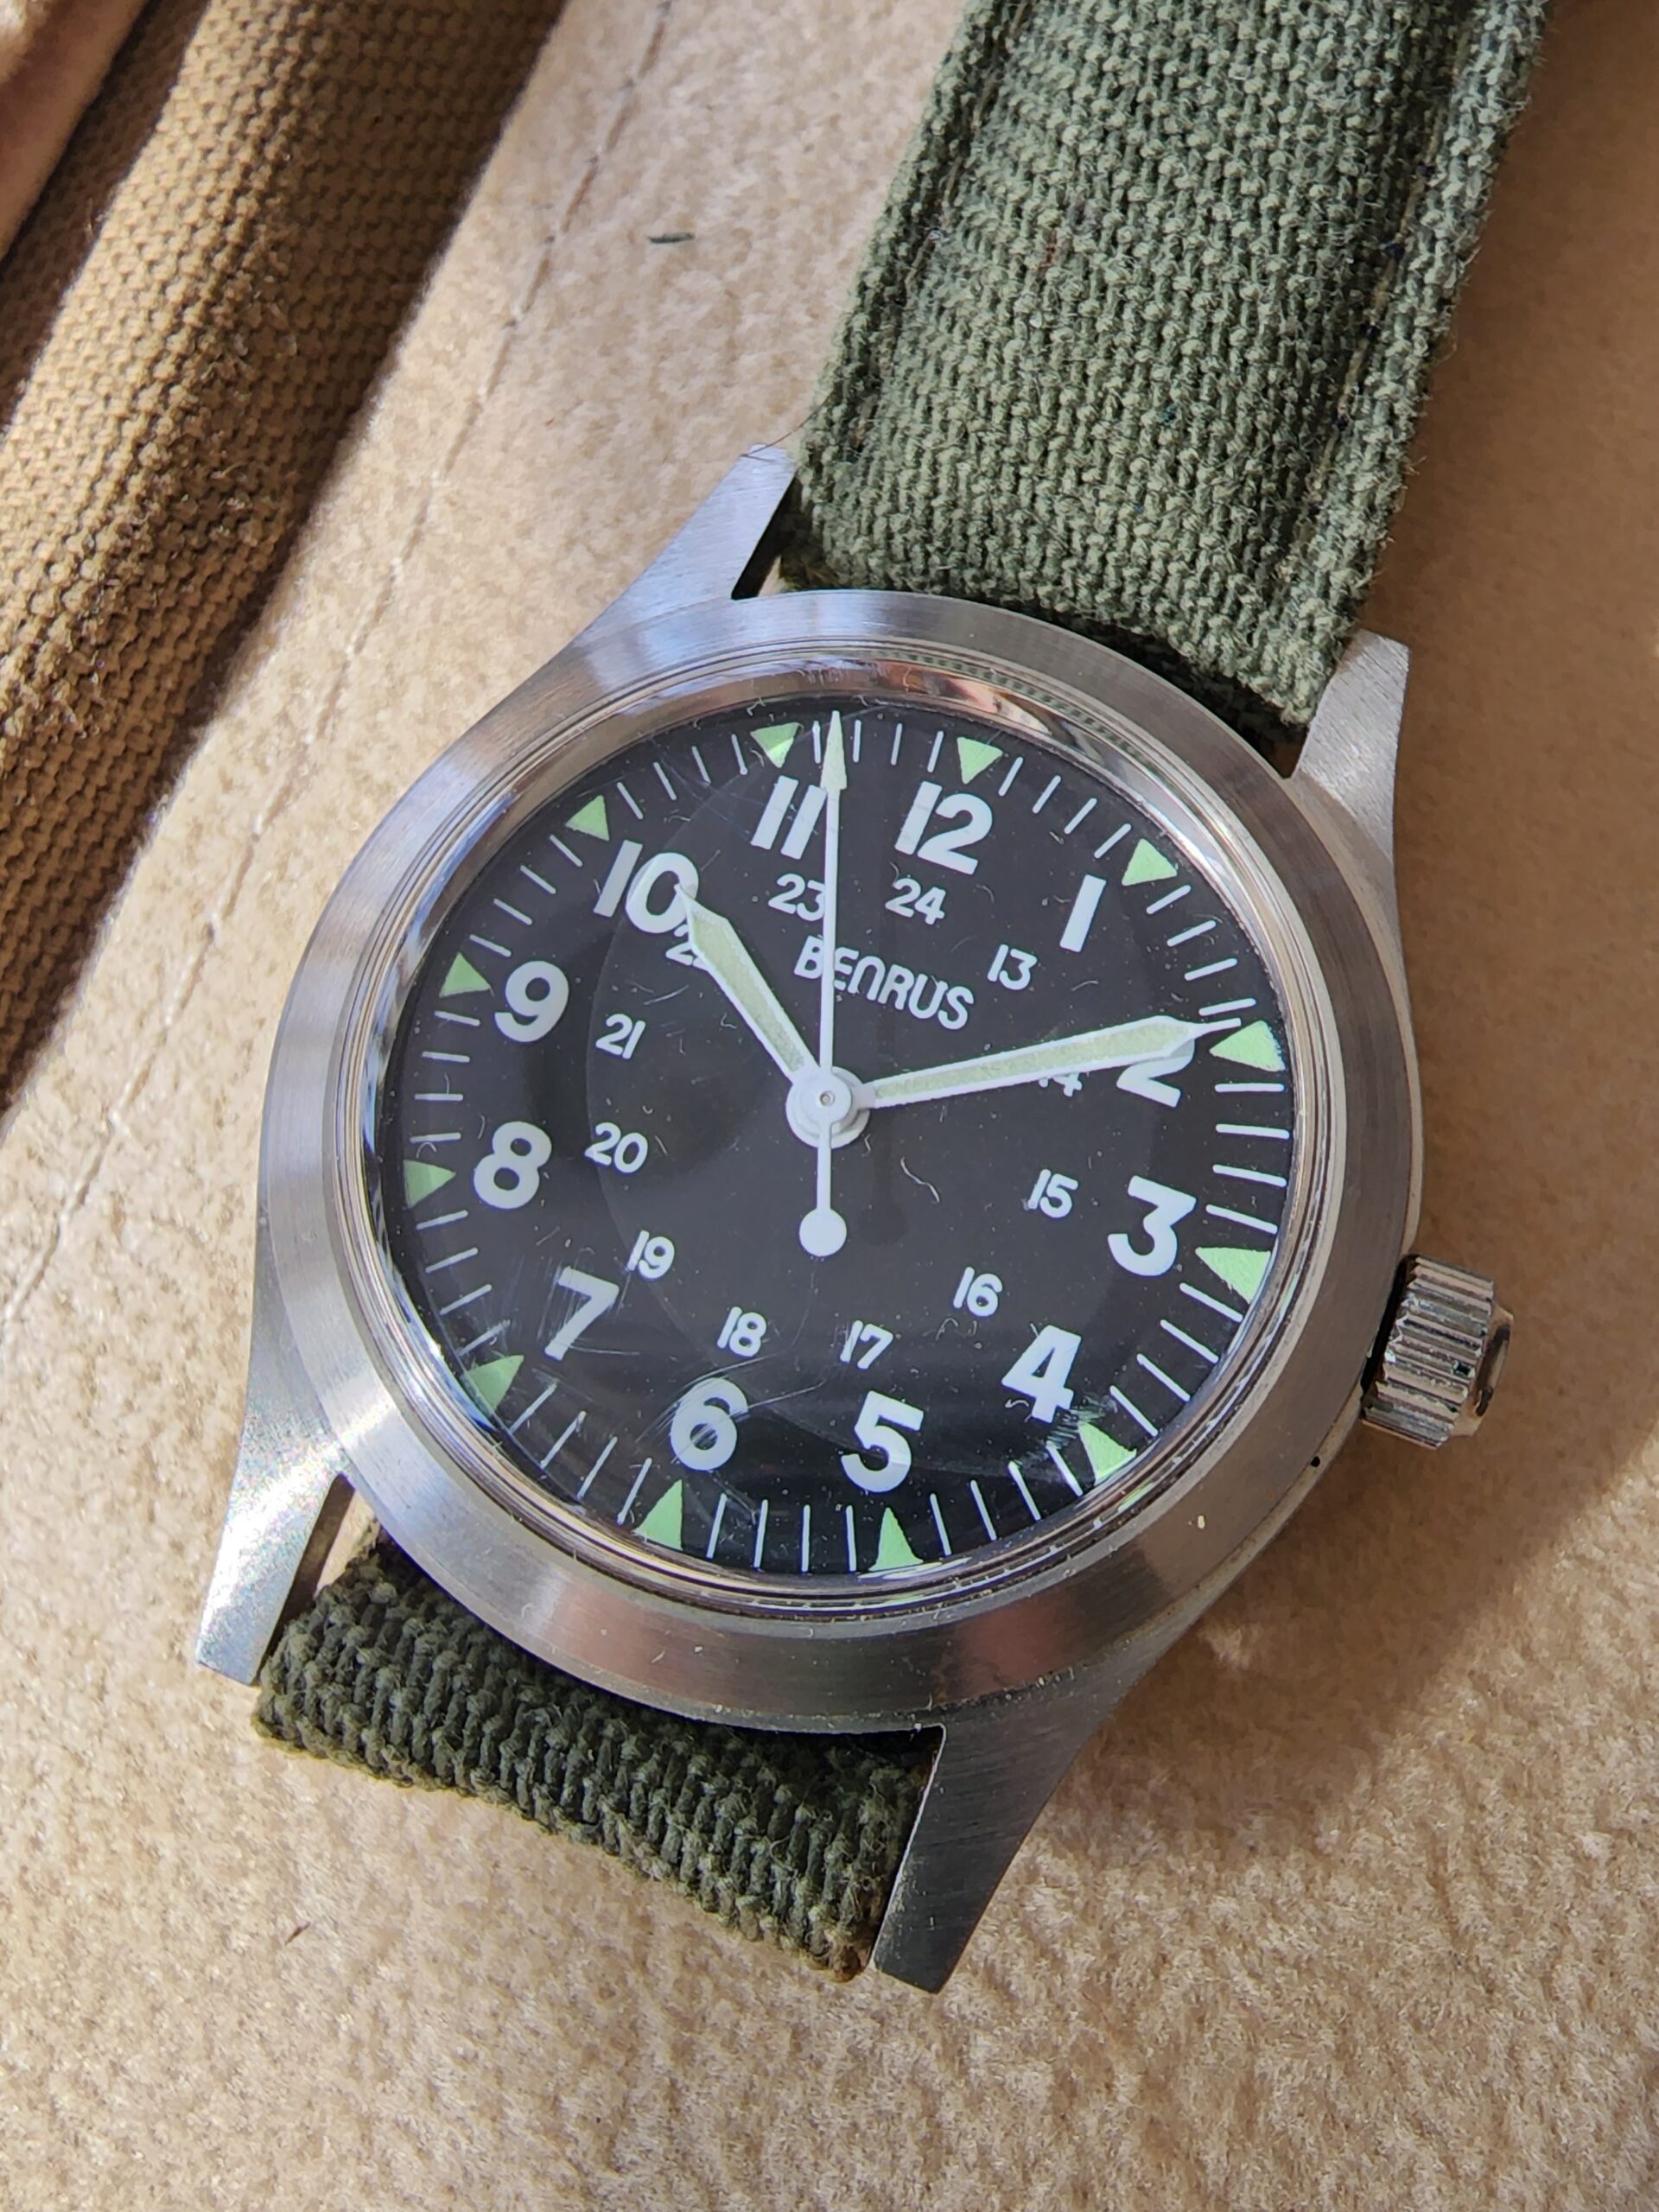 Benrus hand-wound WWII 50th Anniversary D-Day Military Watch | Windy ...